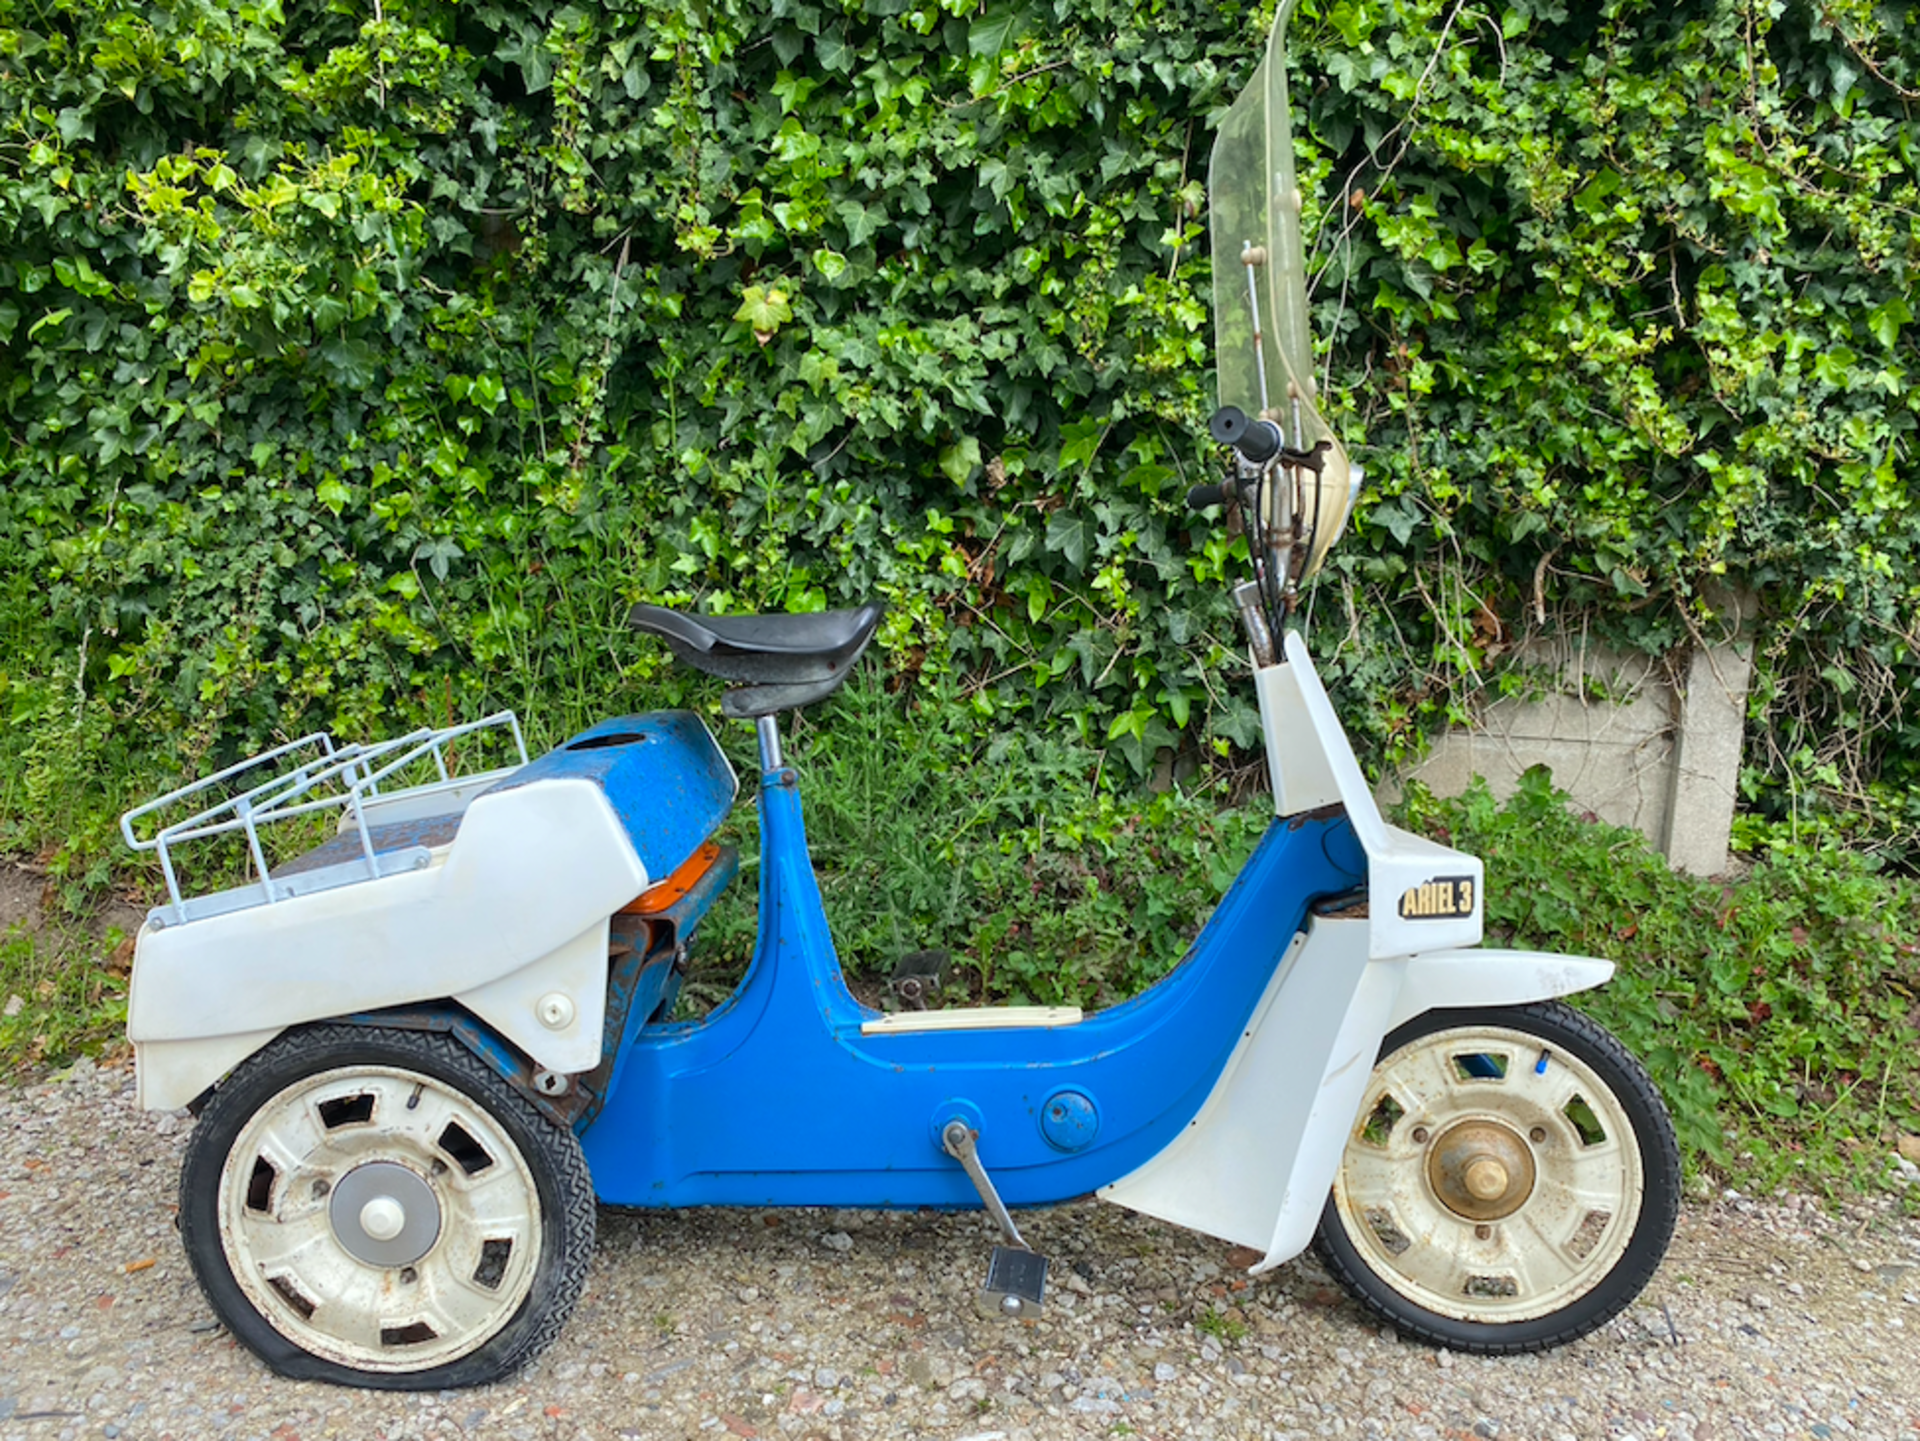 1972 BSA ARIEL 3 TRICYCLE - Image 2 of 6